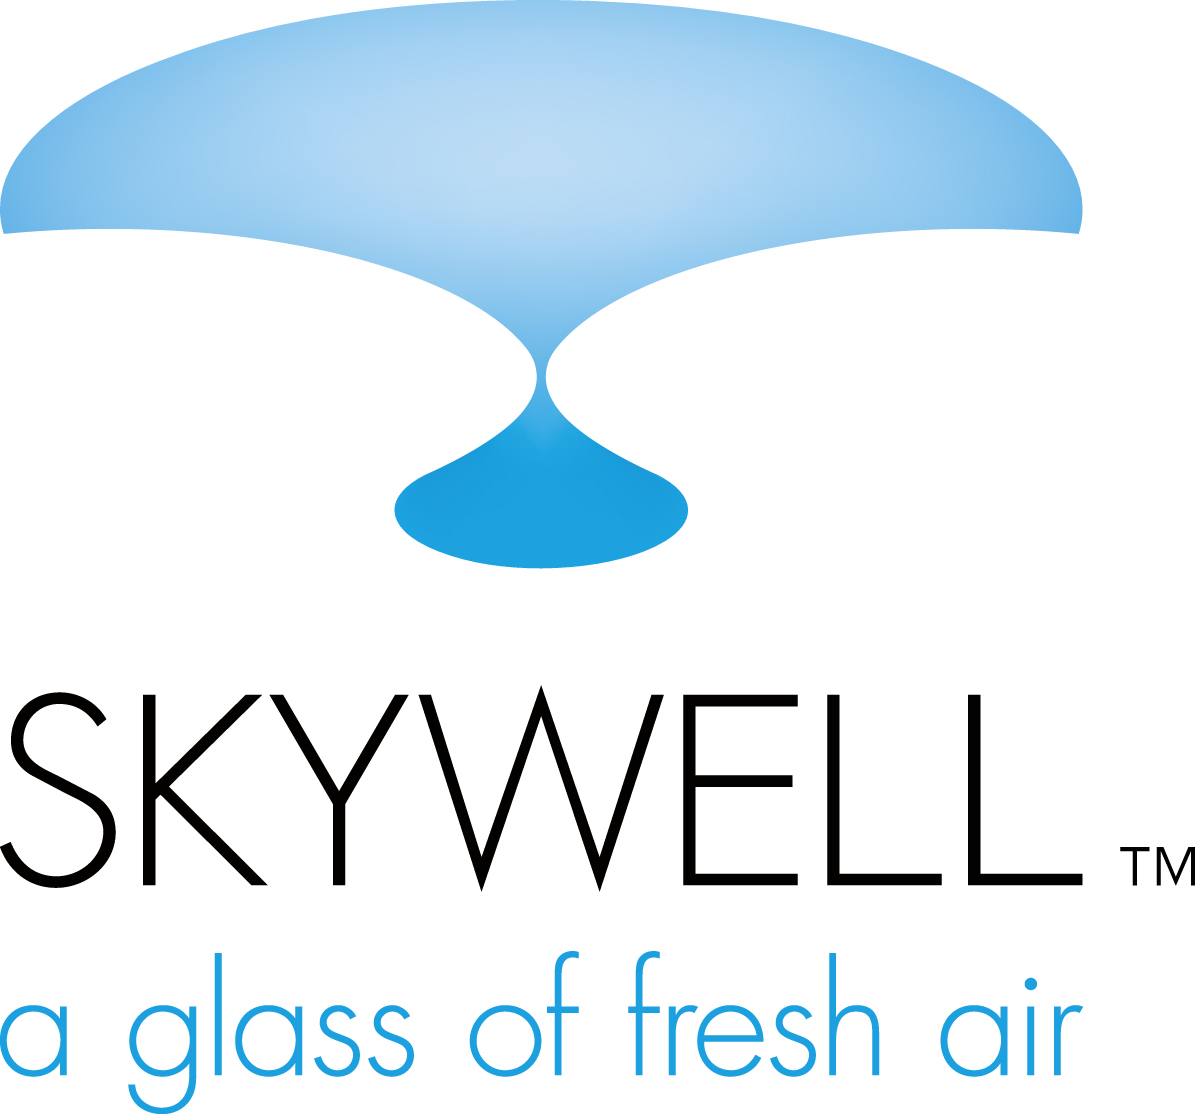 Skywell Brings Air Water to Southern California Businesses As Sustainable Alternative to Conventional Water Sources Image.